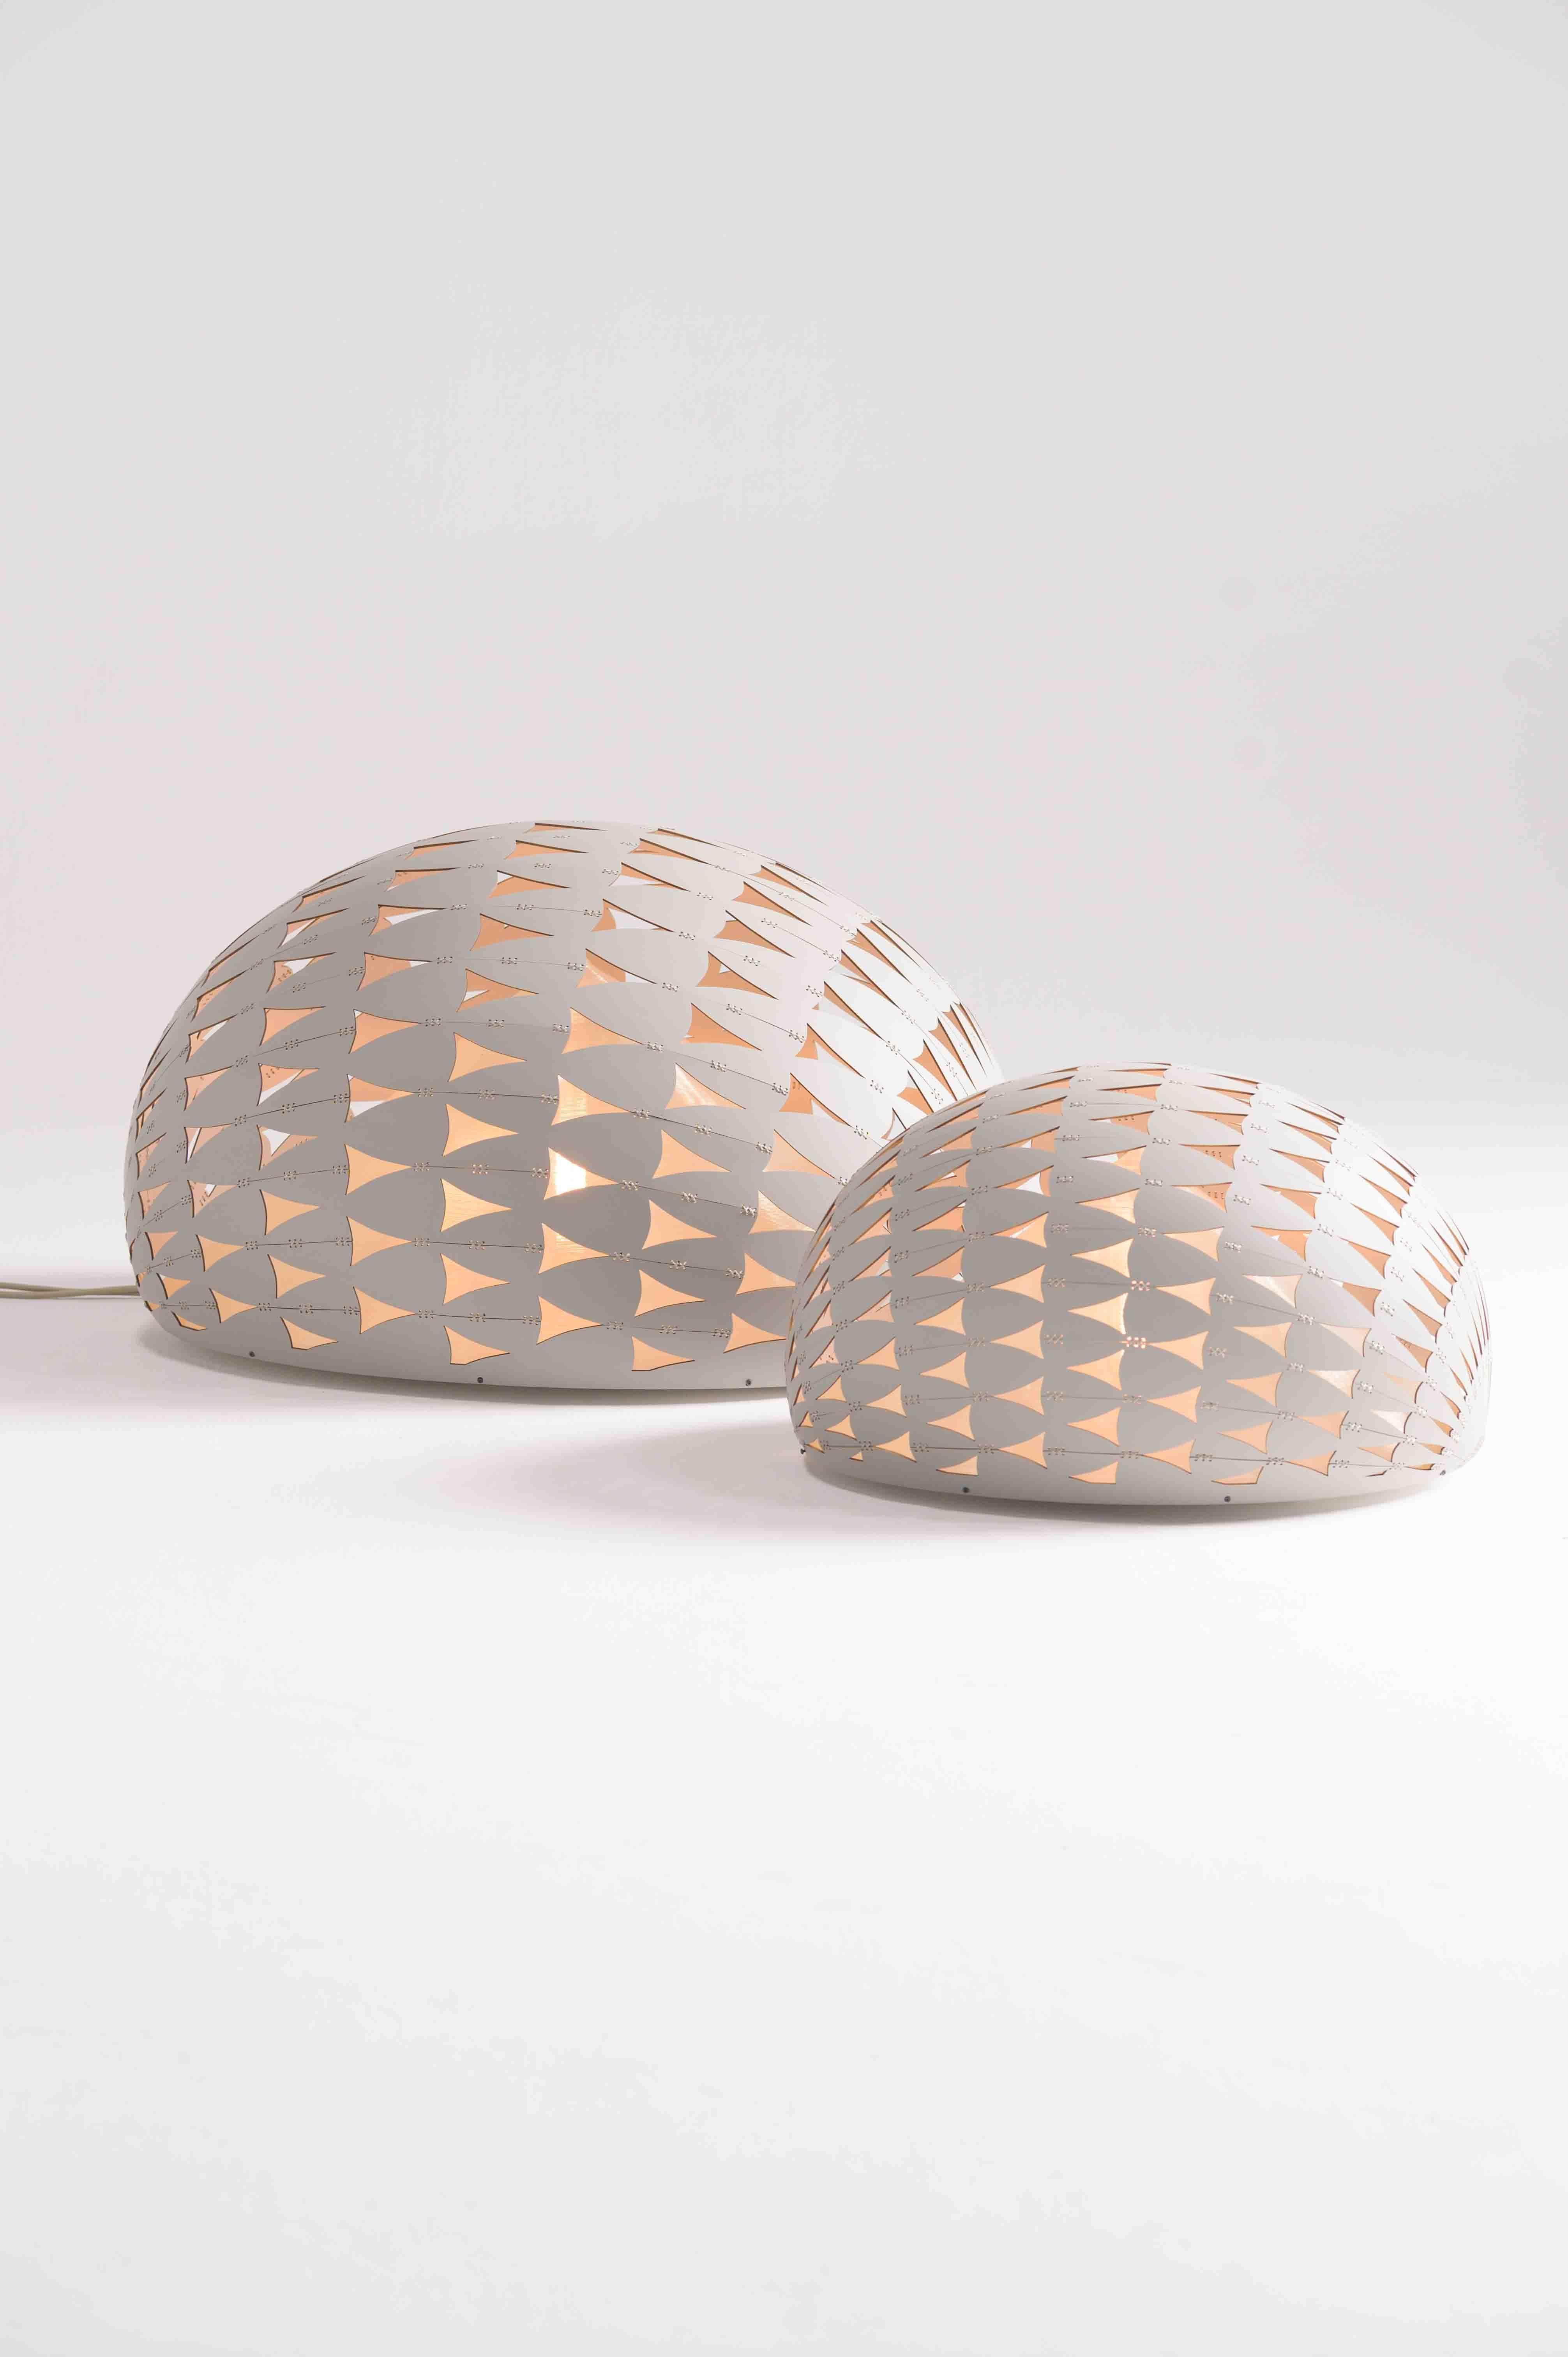 A distinctive lighting fixture inspired by the resilient and captivating armadillo. Crafted with outdoor durability in mind, this lamp combines functional design with artistic flair, bringing warmth and character to any outdoor space.

Features a